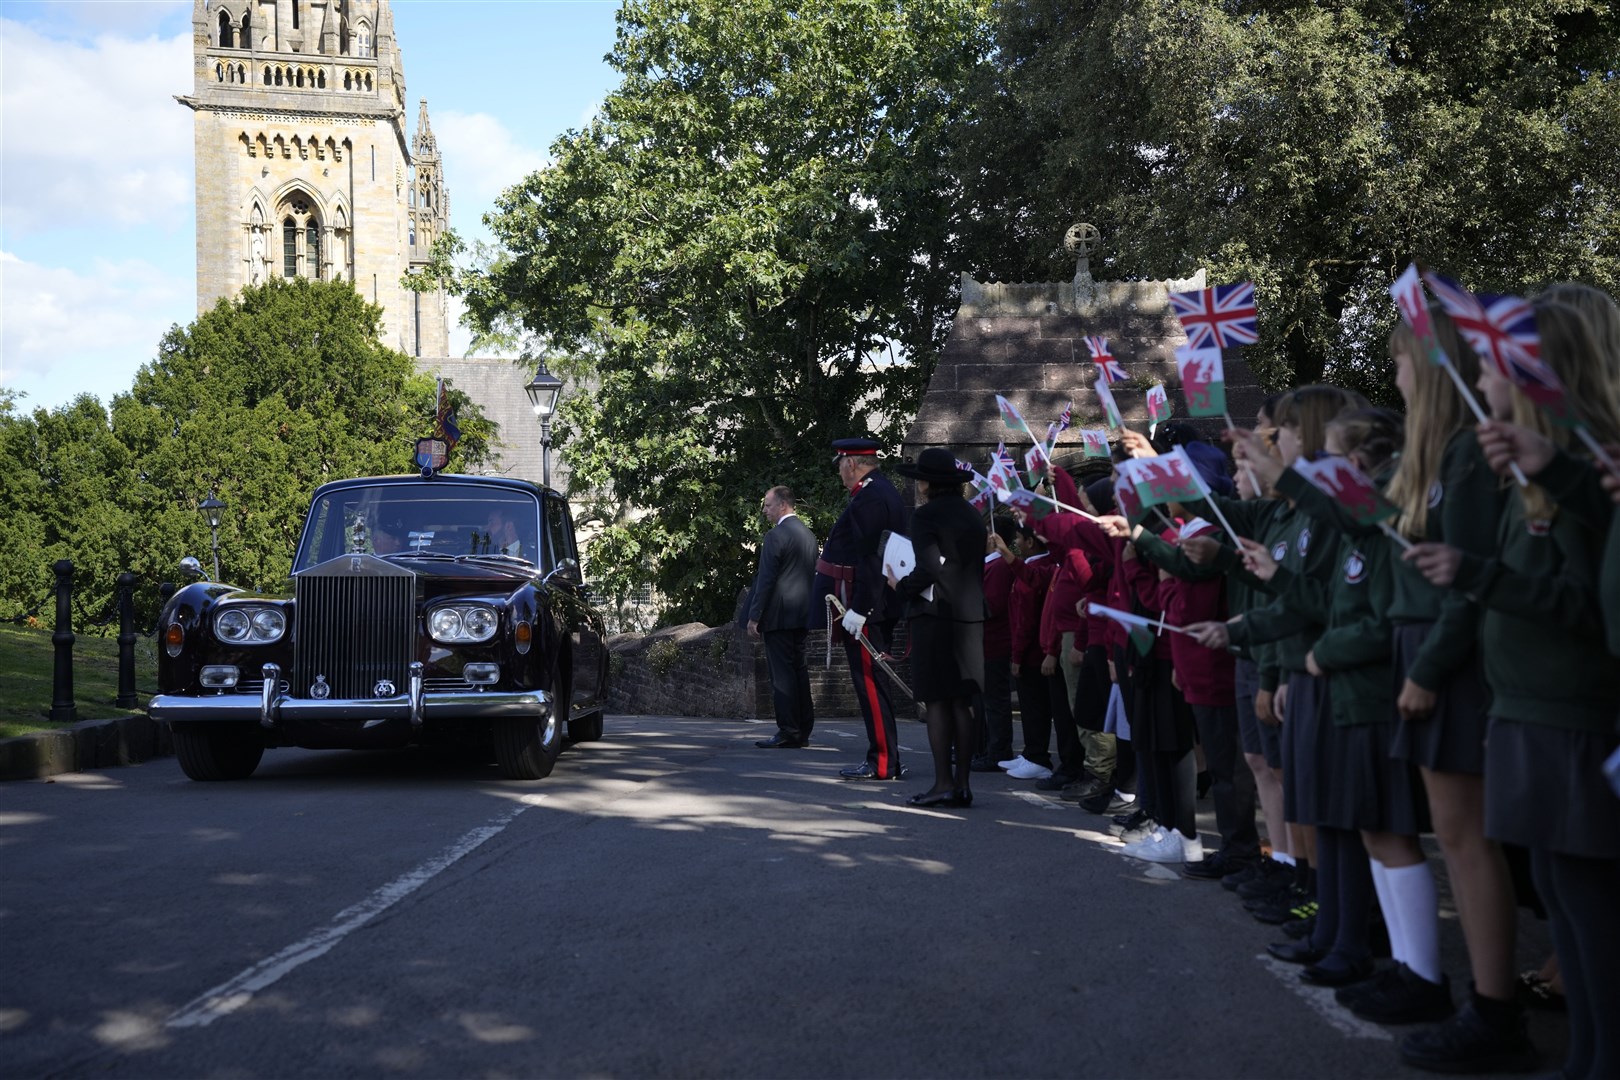 Crowds cheer as the royal couple drive through Cardiff (Frank Augstein/PA)